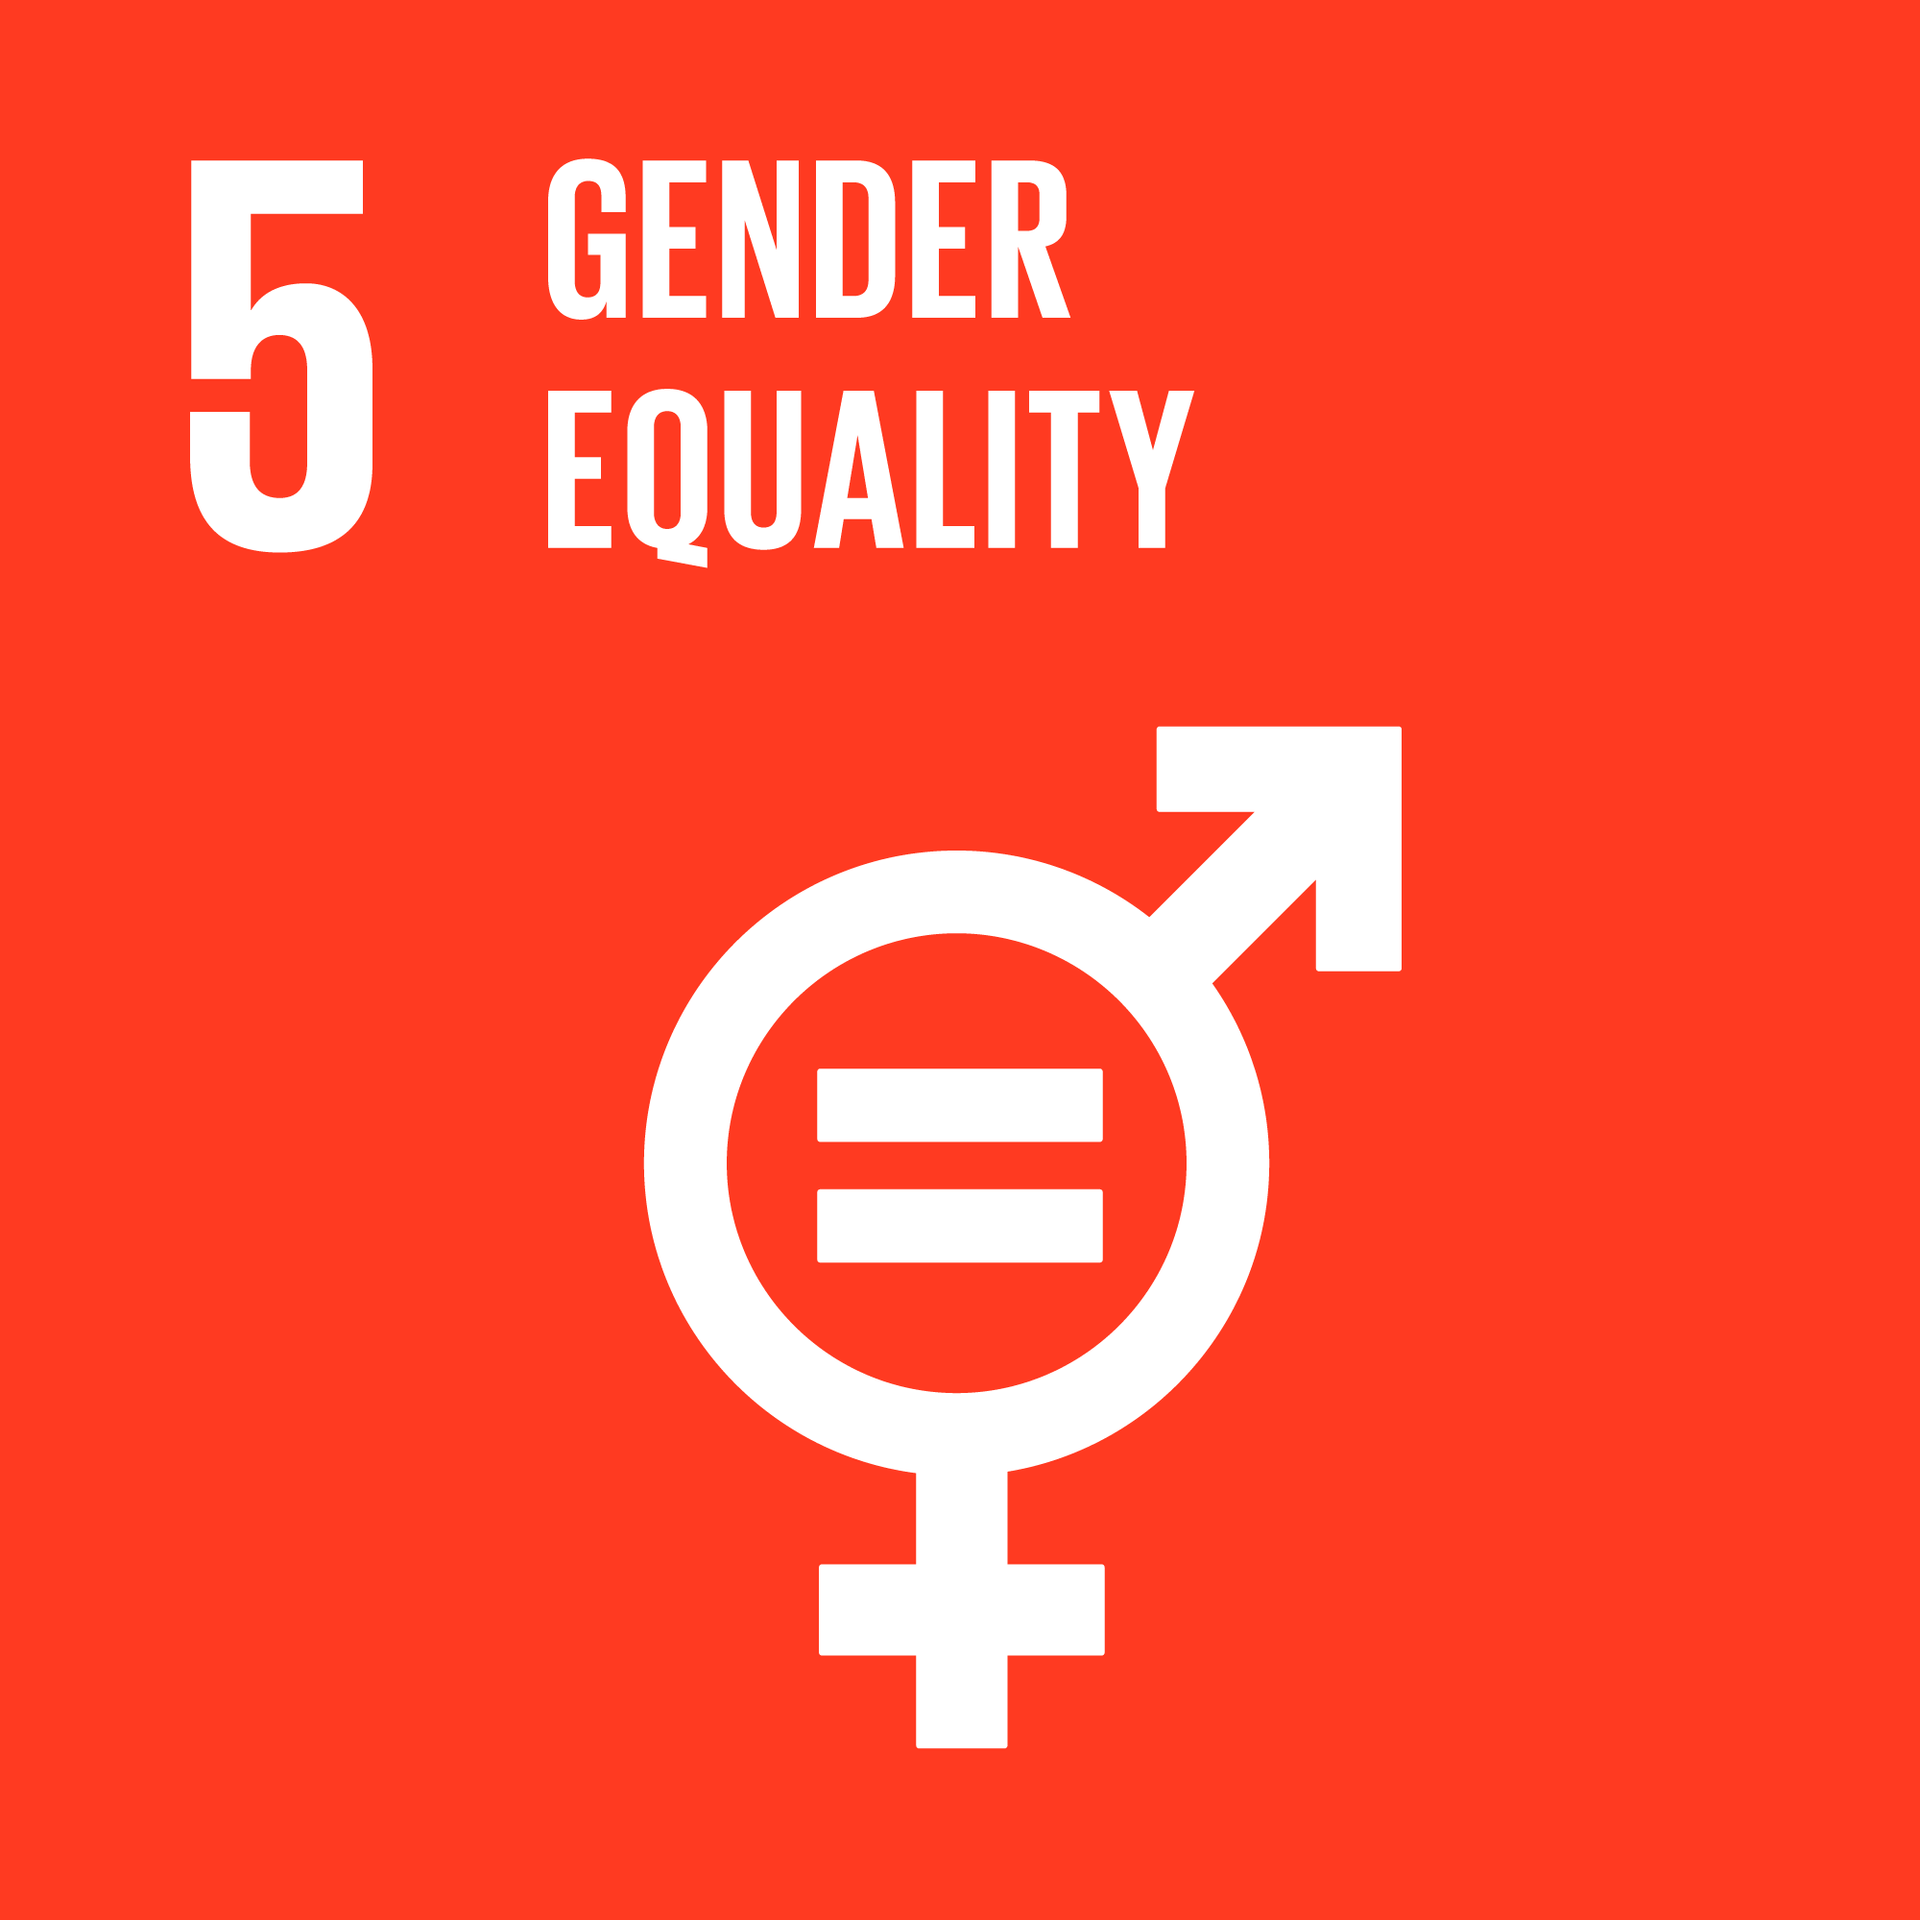 A red background with the words `` gender equality '' and a female and male symbol.